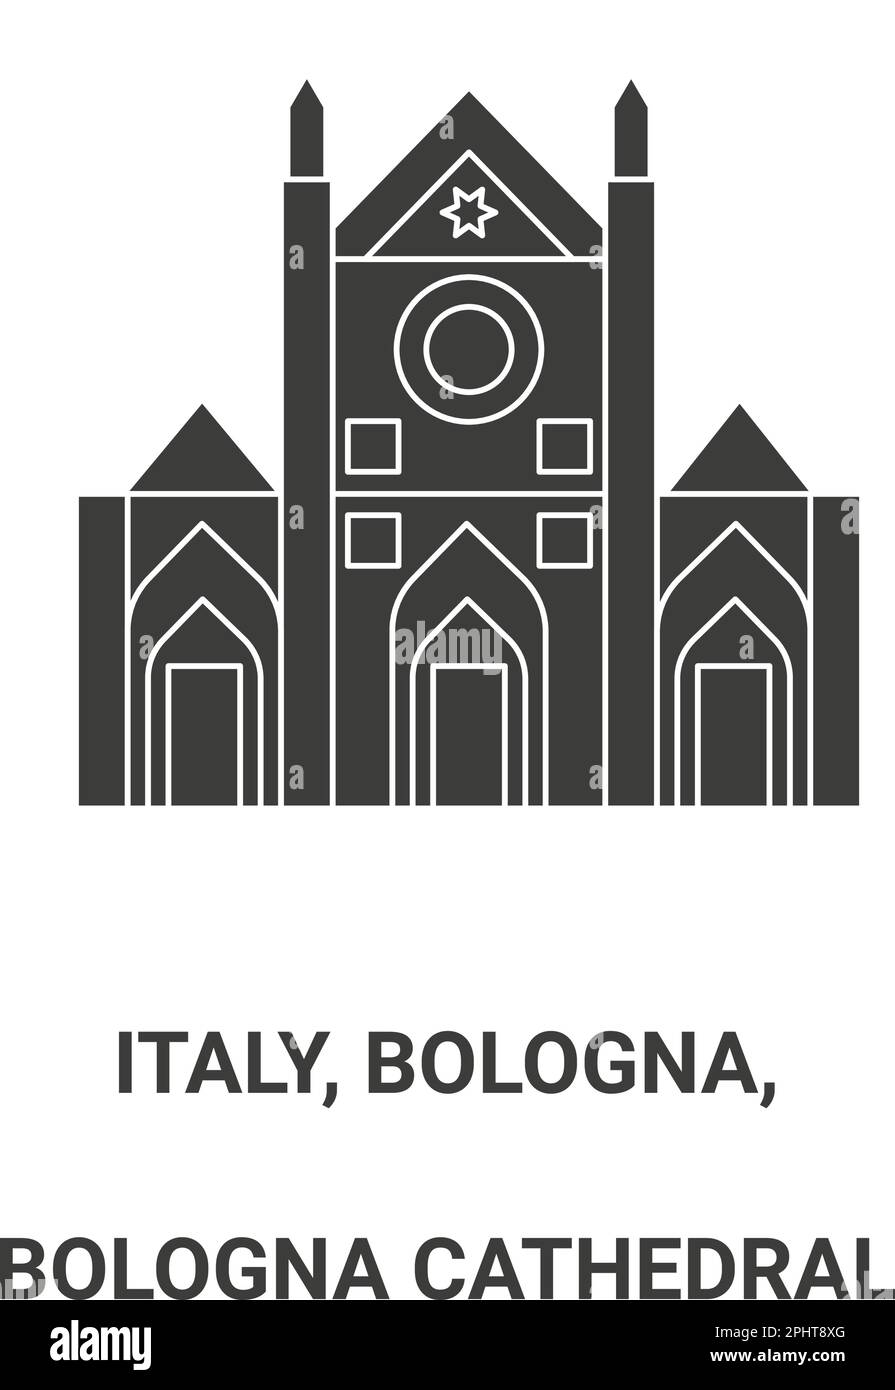 Church of san domenico bologna Cut Out Stock Images & Pictures - Alamy